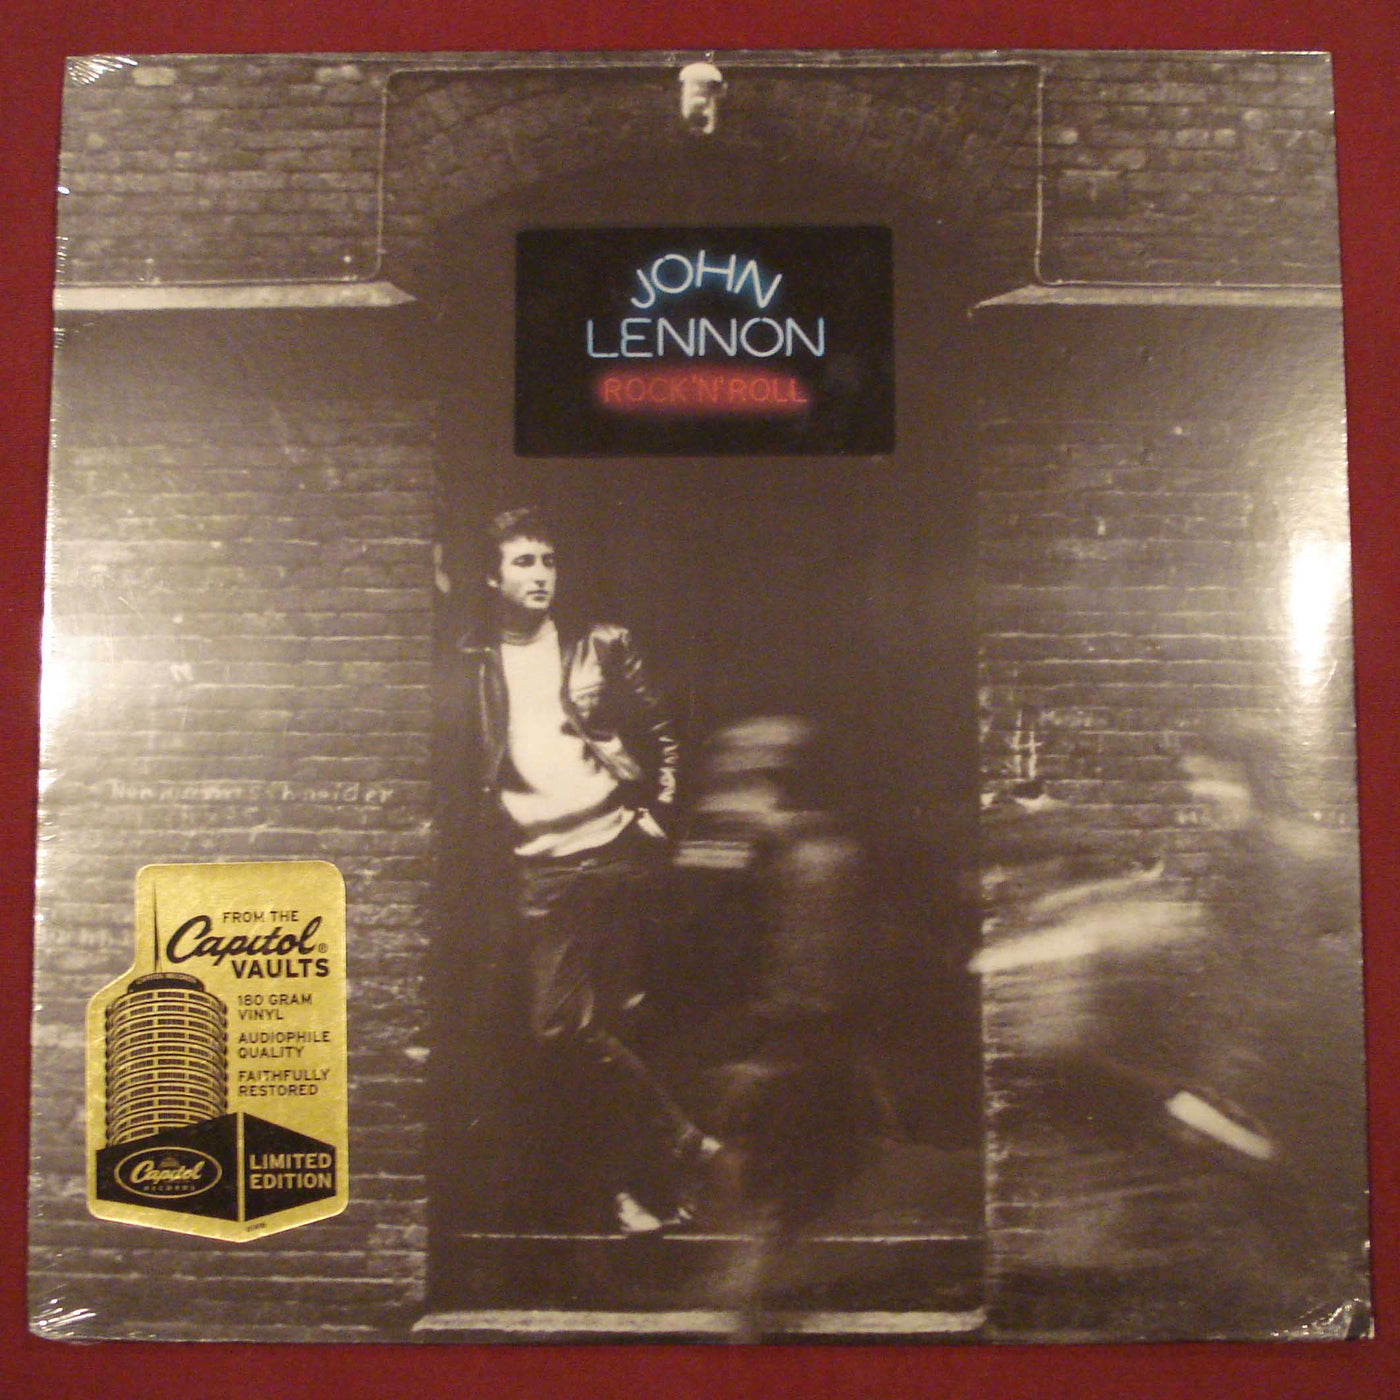 John Lennon - Rock n Roll (1975) Vinyl LP 33rpm SK-3419 Sealed Special Limited Edition Re-Release